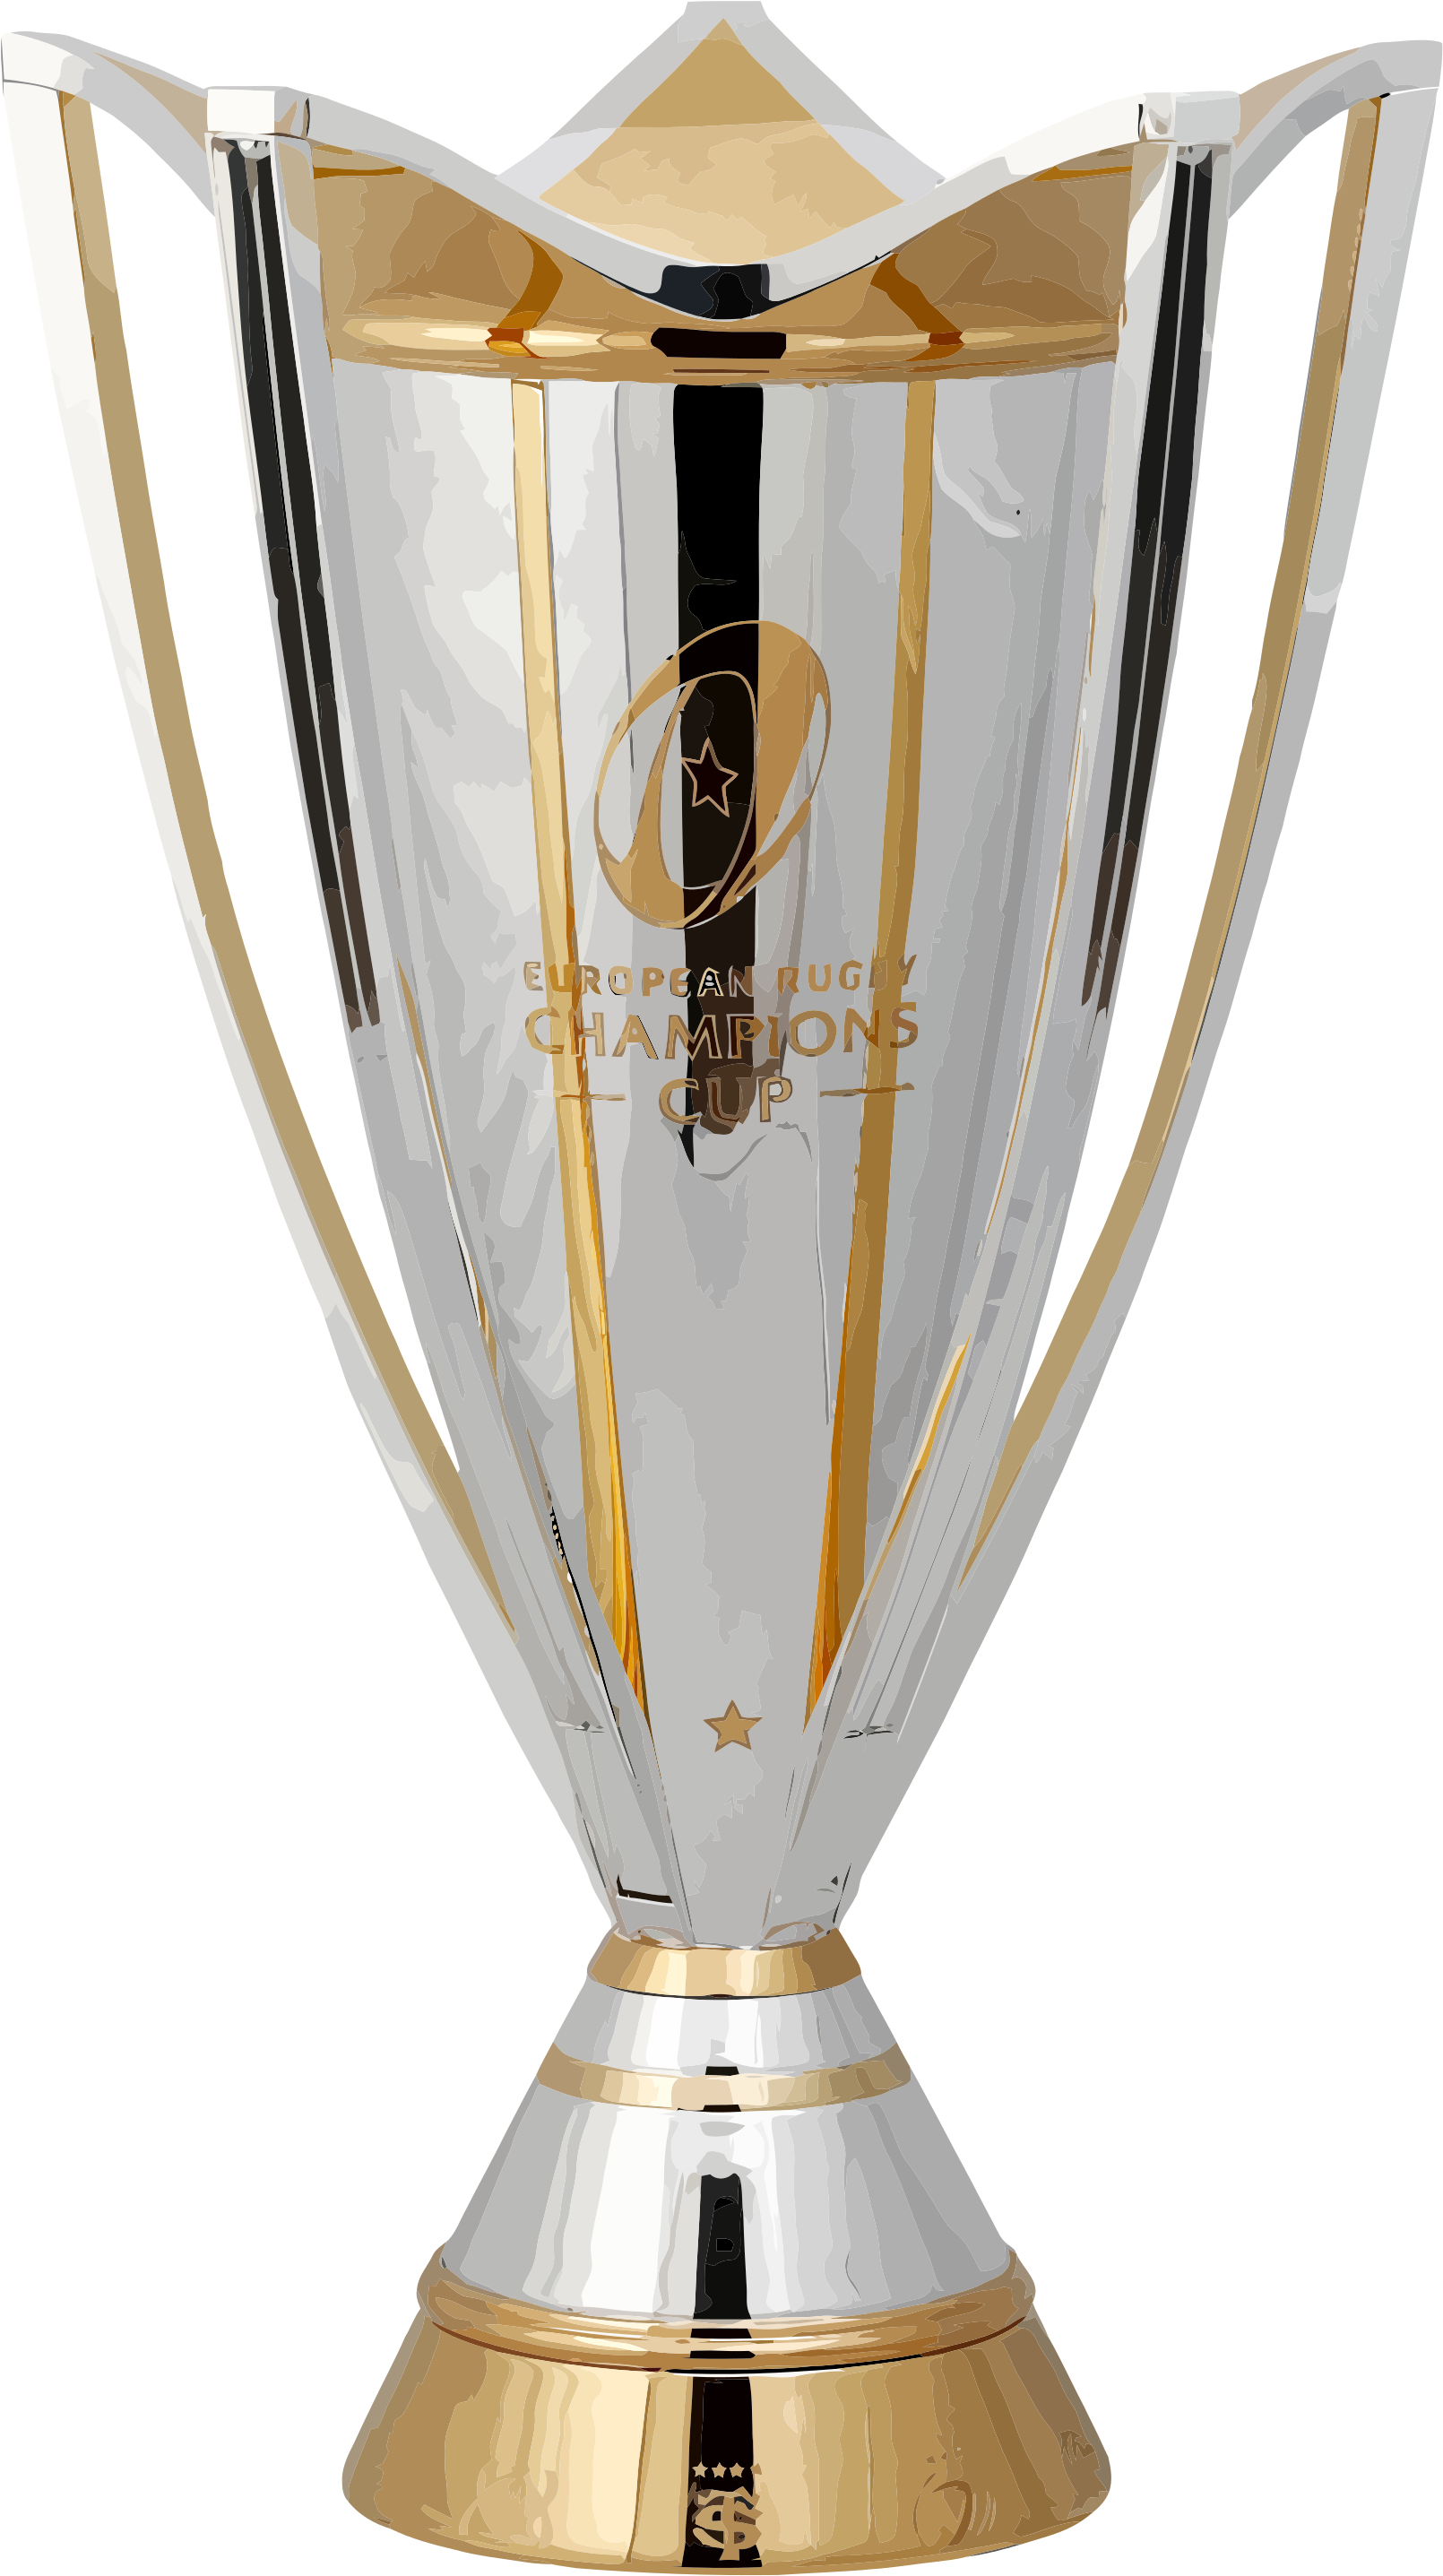 Trophy Png 16, - European Rugby Champions Cup Trophy (2000x3265)